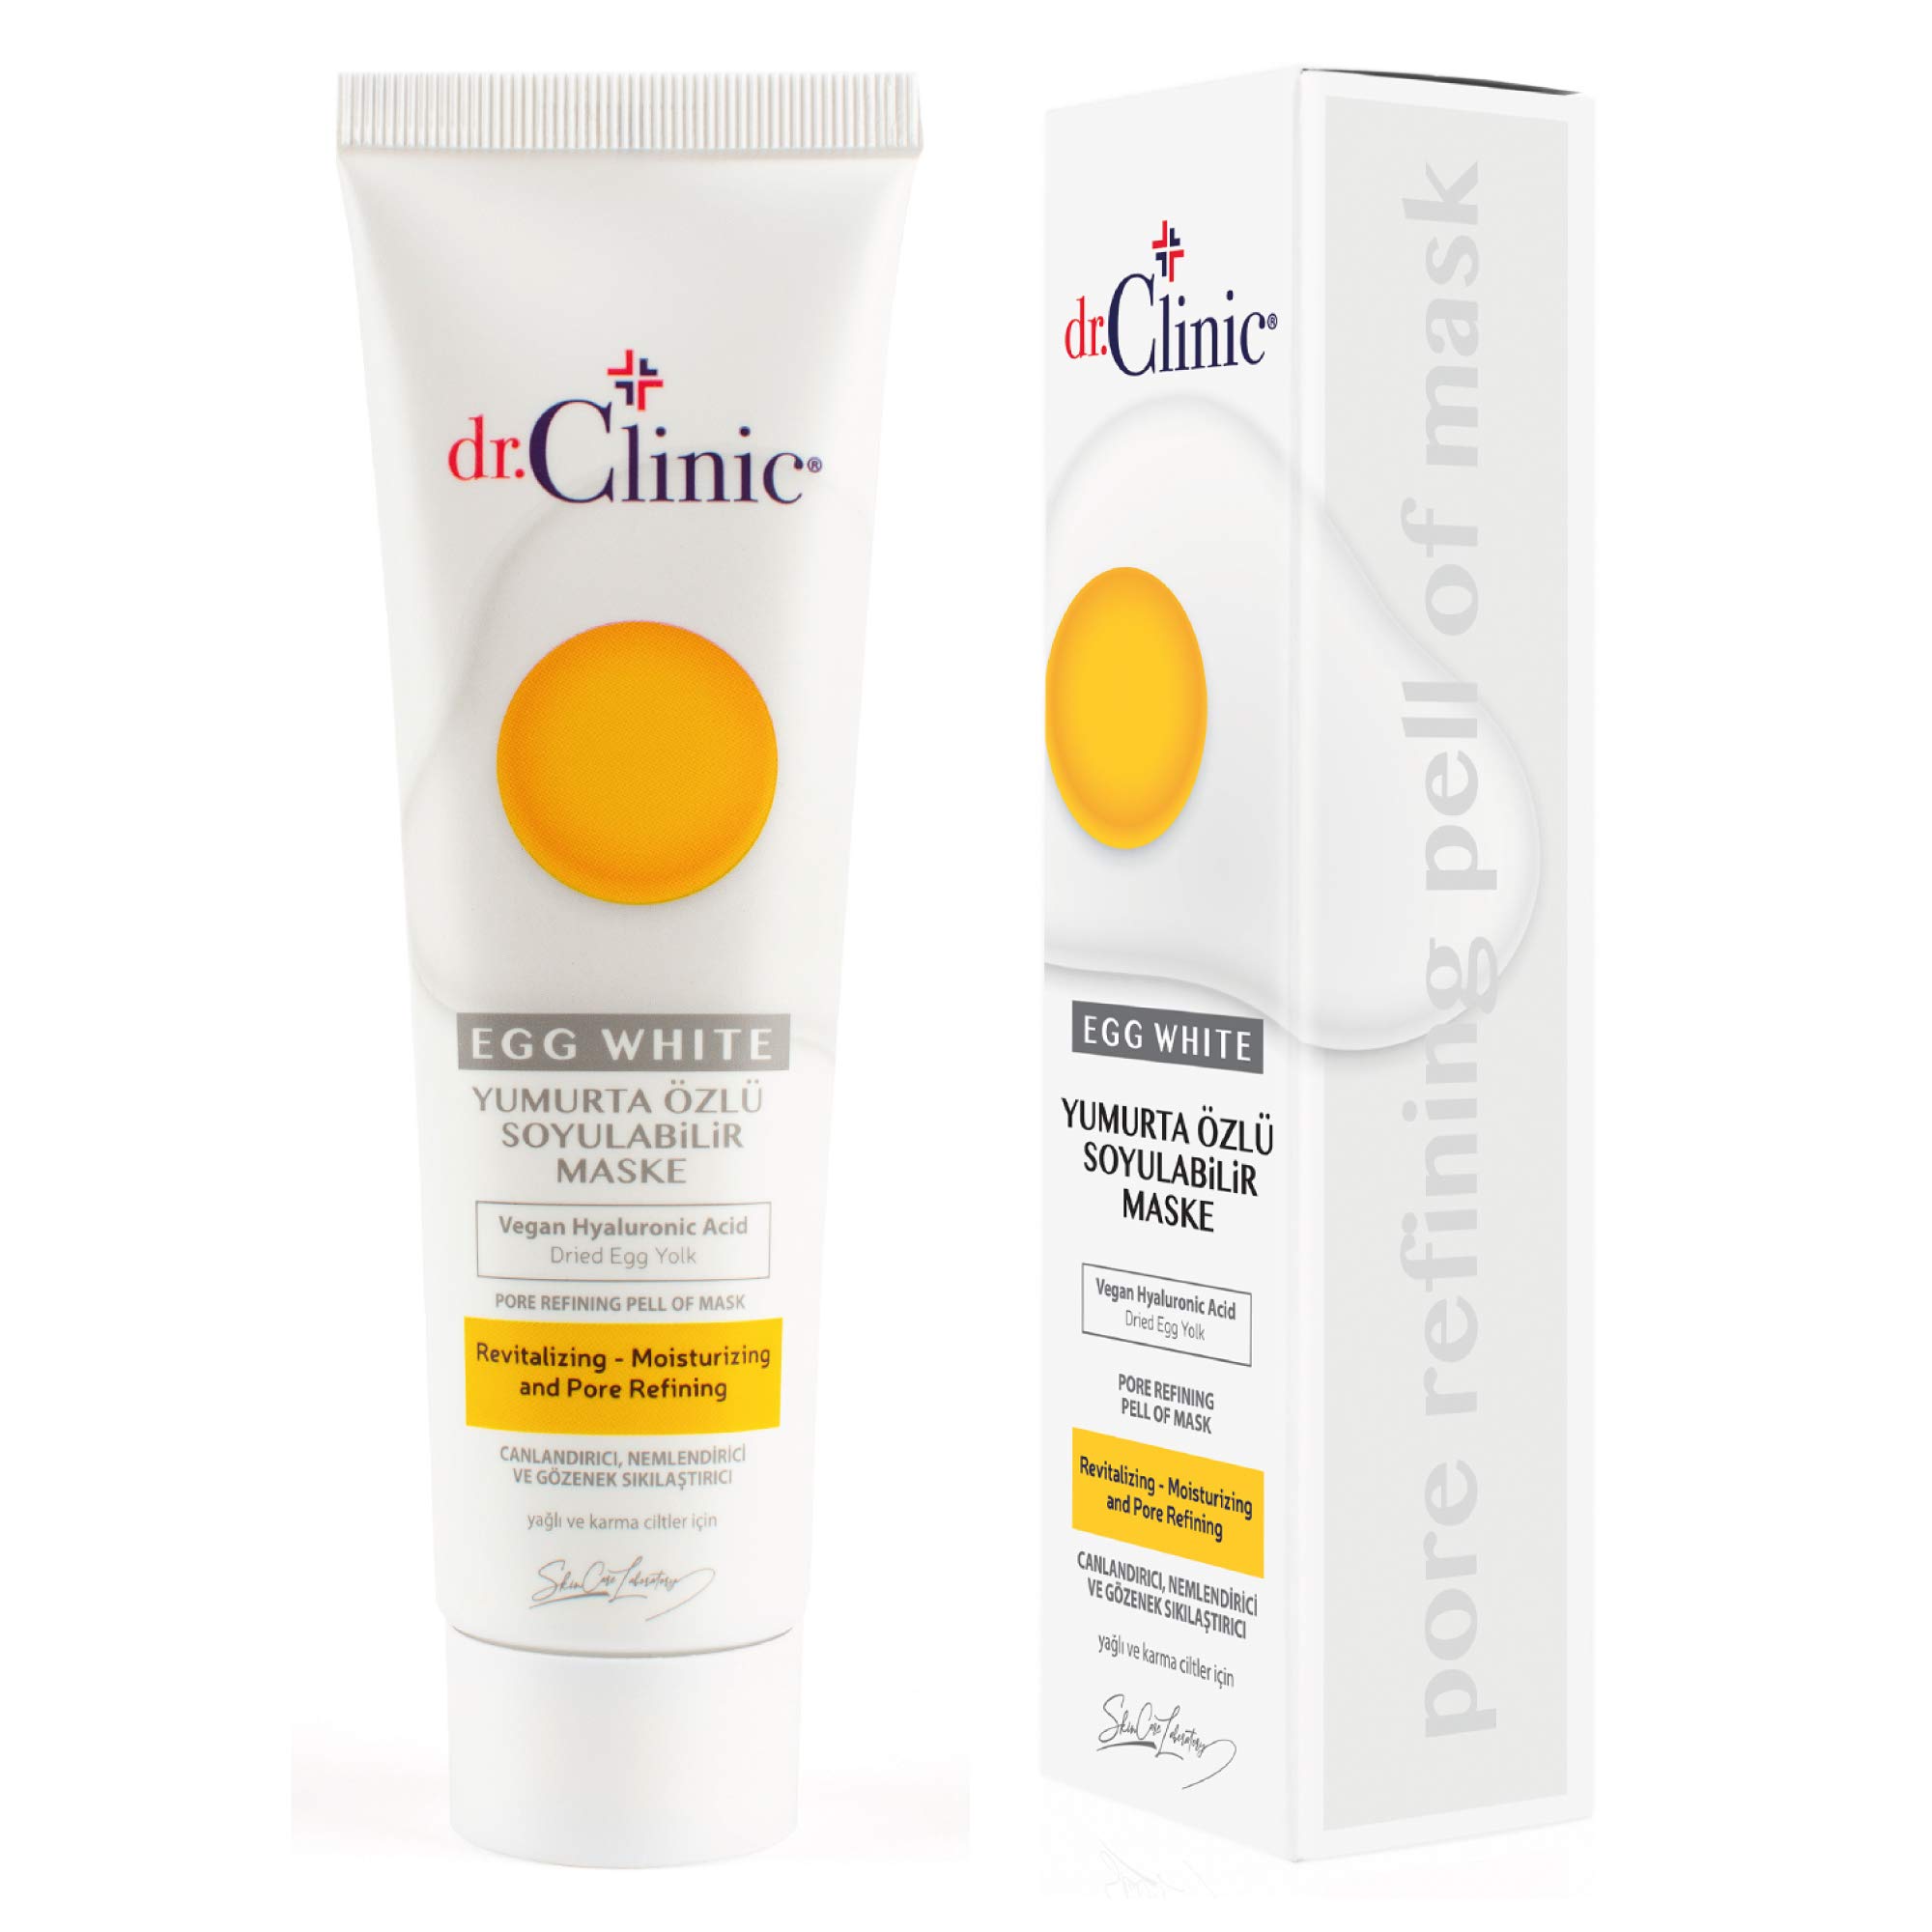 Dr.Clinic Egg White Pore Refining Peel Off Mask with Drilled Egg Yolk, Vegan Hyaluronic Acid | Revitalizing, Moisturizing Peeling Face Mask | Deep Facial Cleansing Treatment | Reduces Fine Lines & Acne Scars | Cruelty-Free, Paraben-Free 3.38 Fl.Oz.